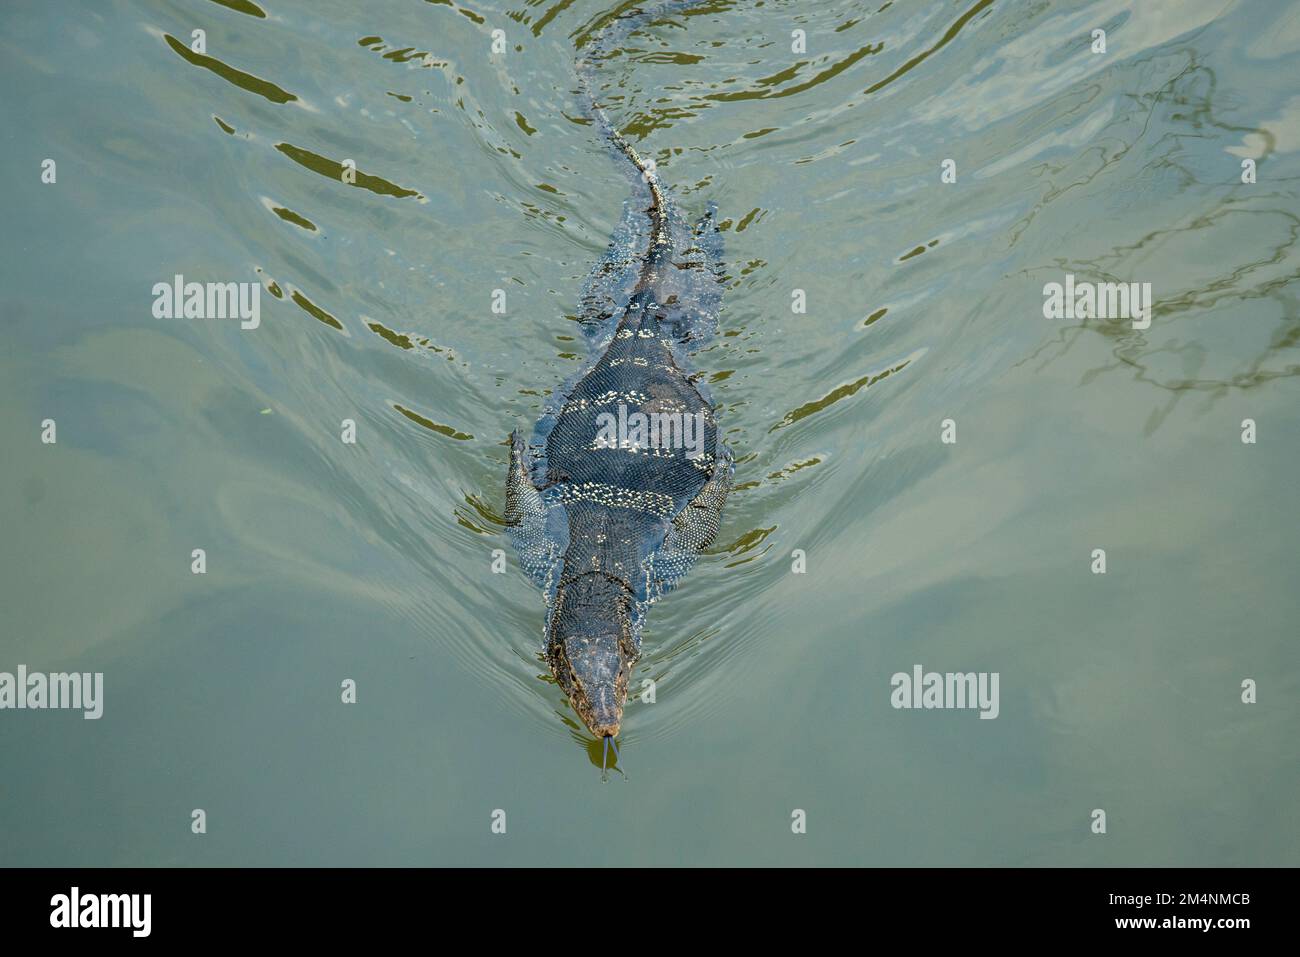 a wild Iguana in the Klong Chula of the Mae Klong River in the Town of Amphawa in the Province of Samut Songkhram in Thailand,  Thailand, Amphawa, Nov Stock Photo